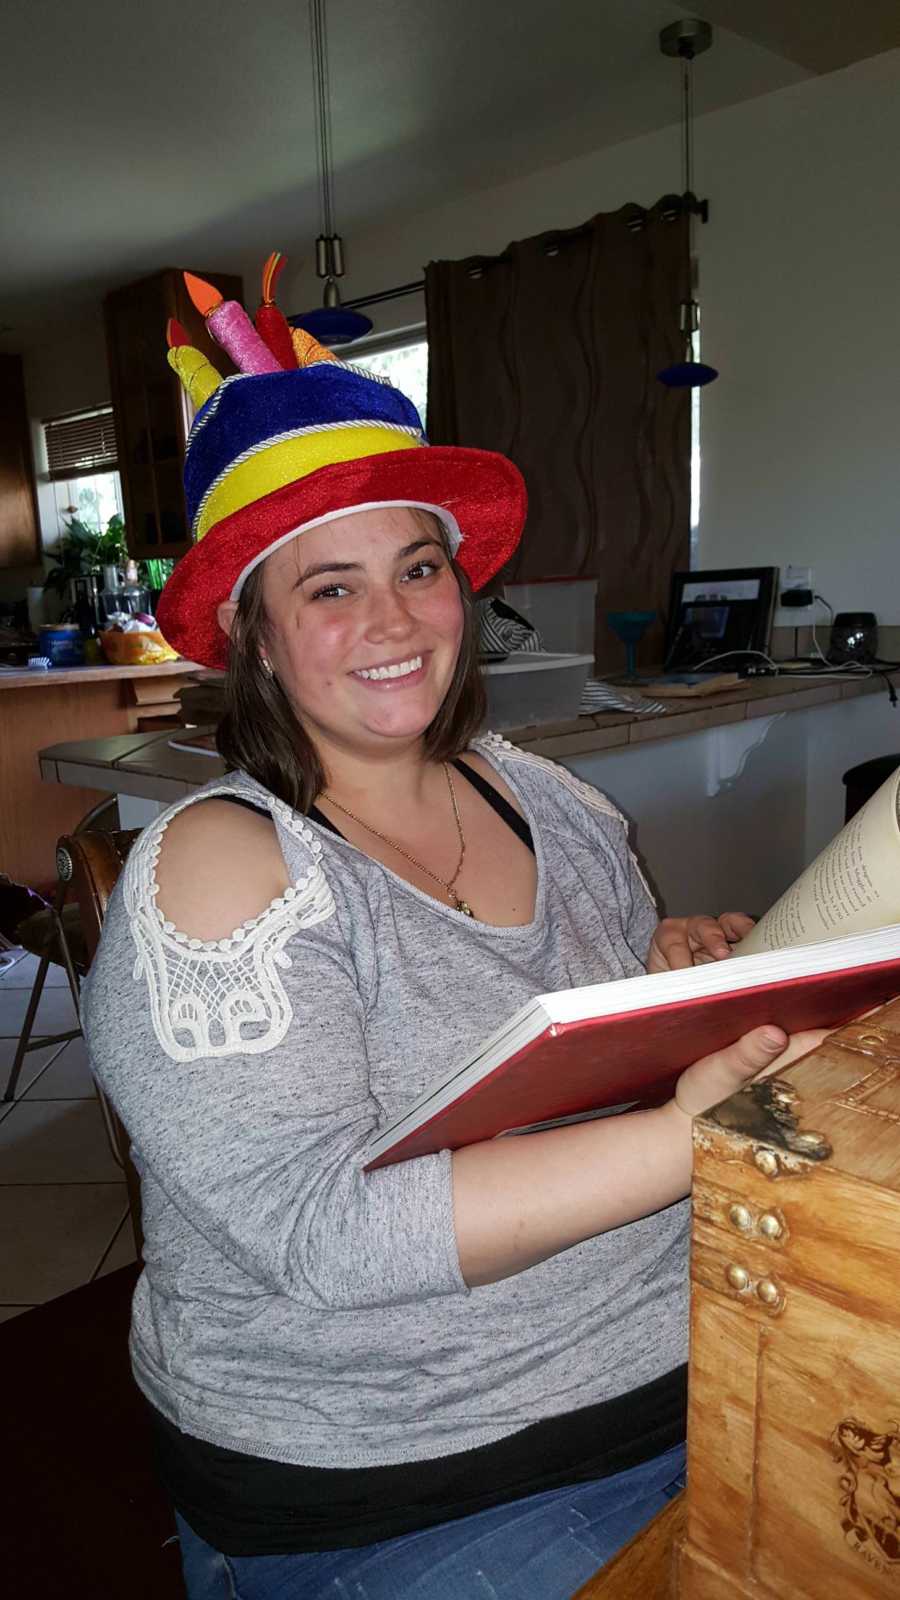 Girlfriend smiling while reading Harry Potter book